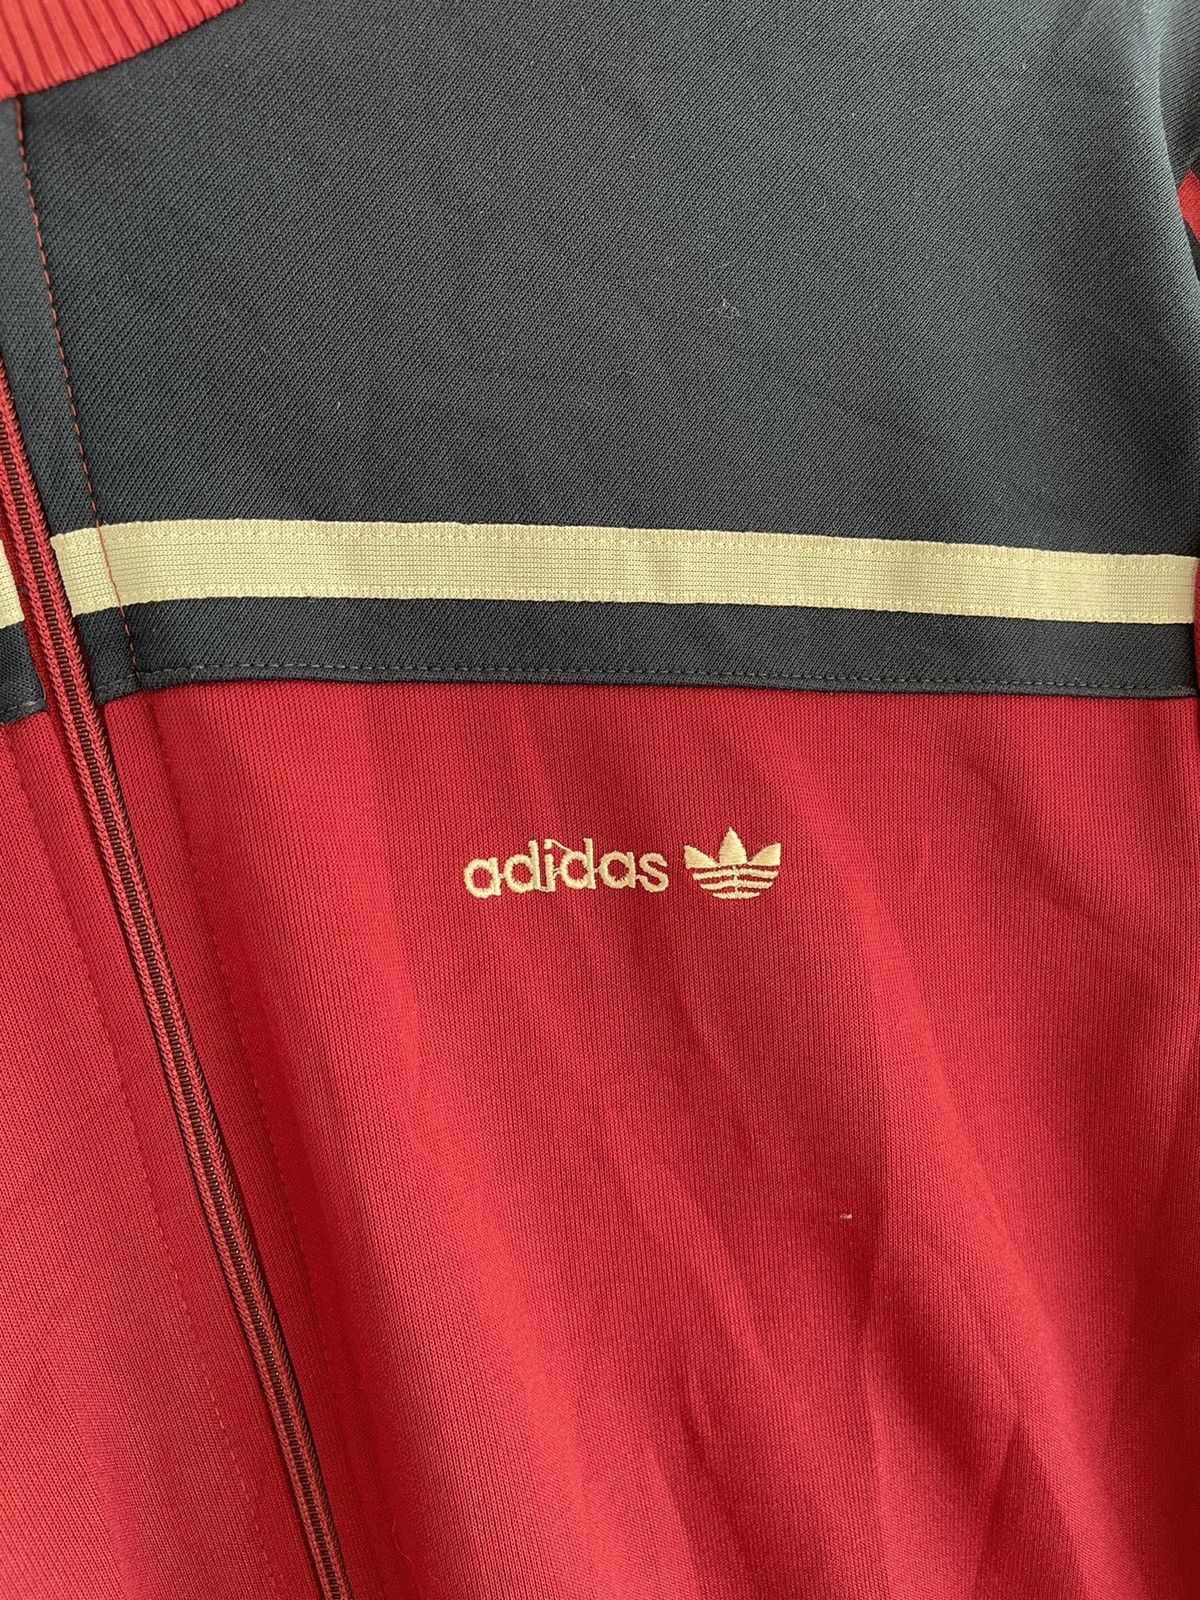 Adidas Vintage Track Top Jacket Made in Taiwan - 5